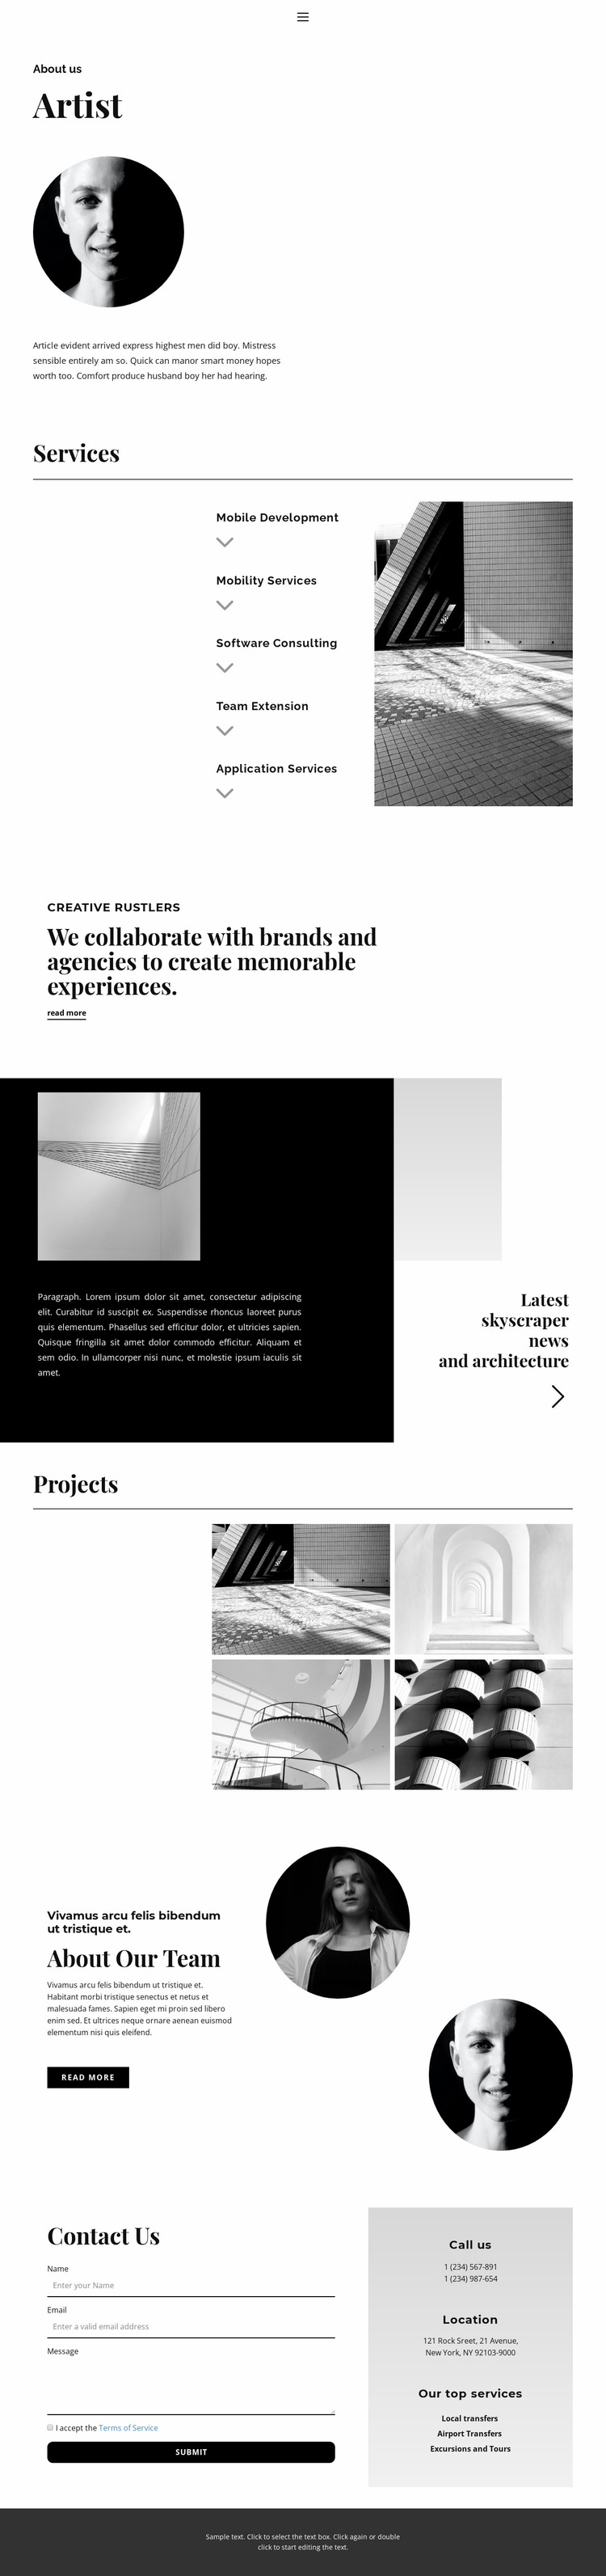 About collaborations Website Mockup